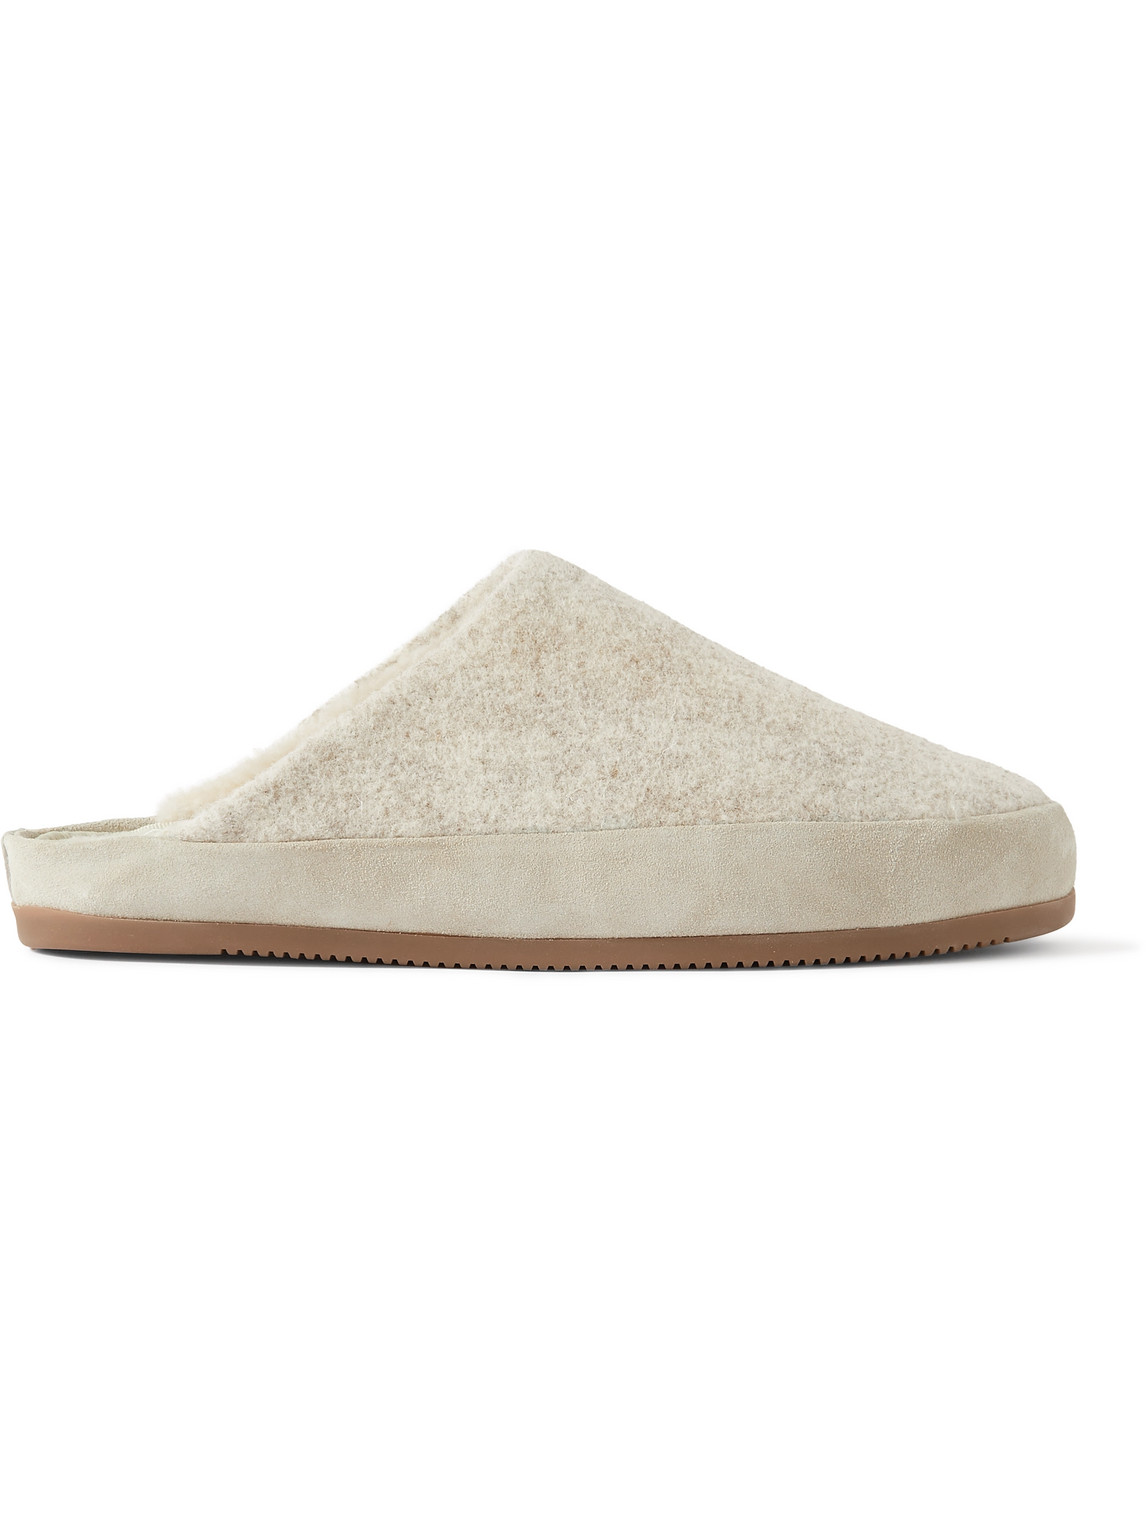 Suede-Trimmed Shearling-Lined Recycled Wool Slippers